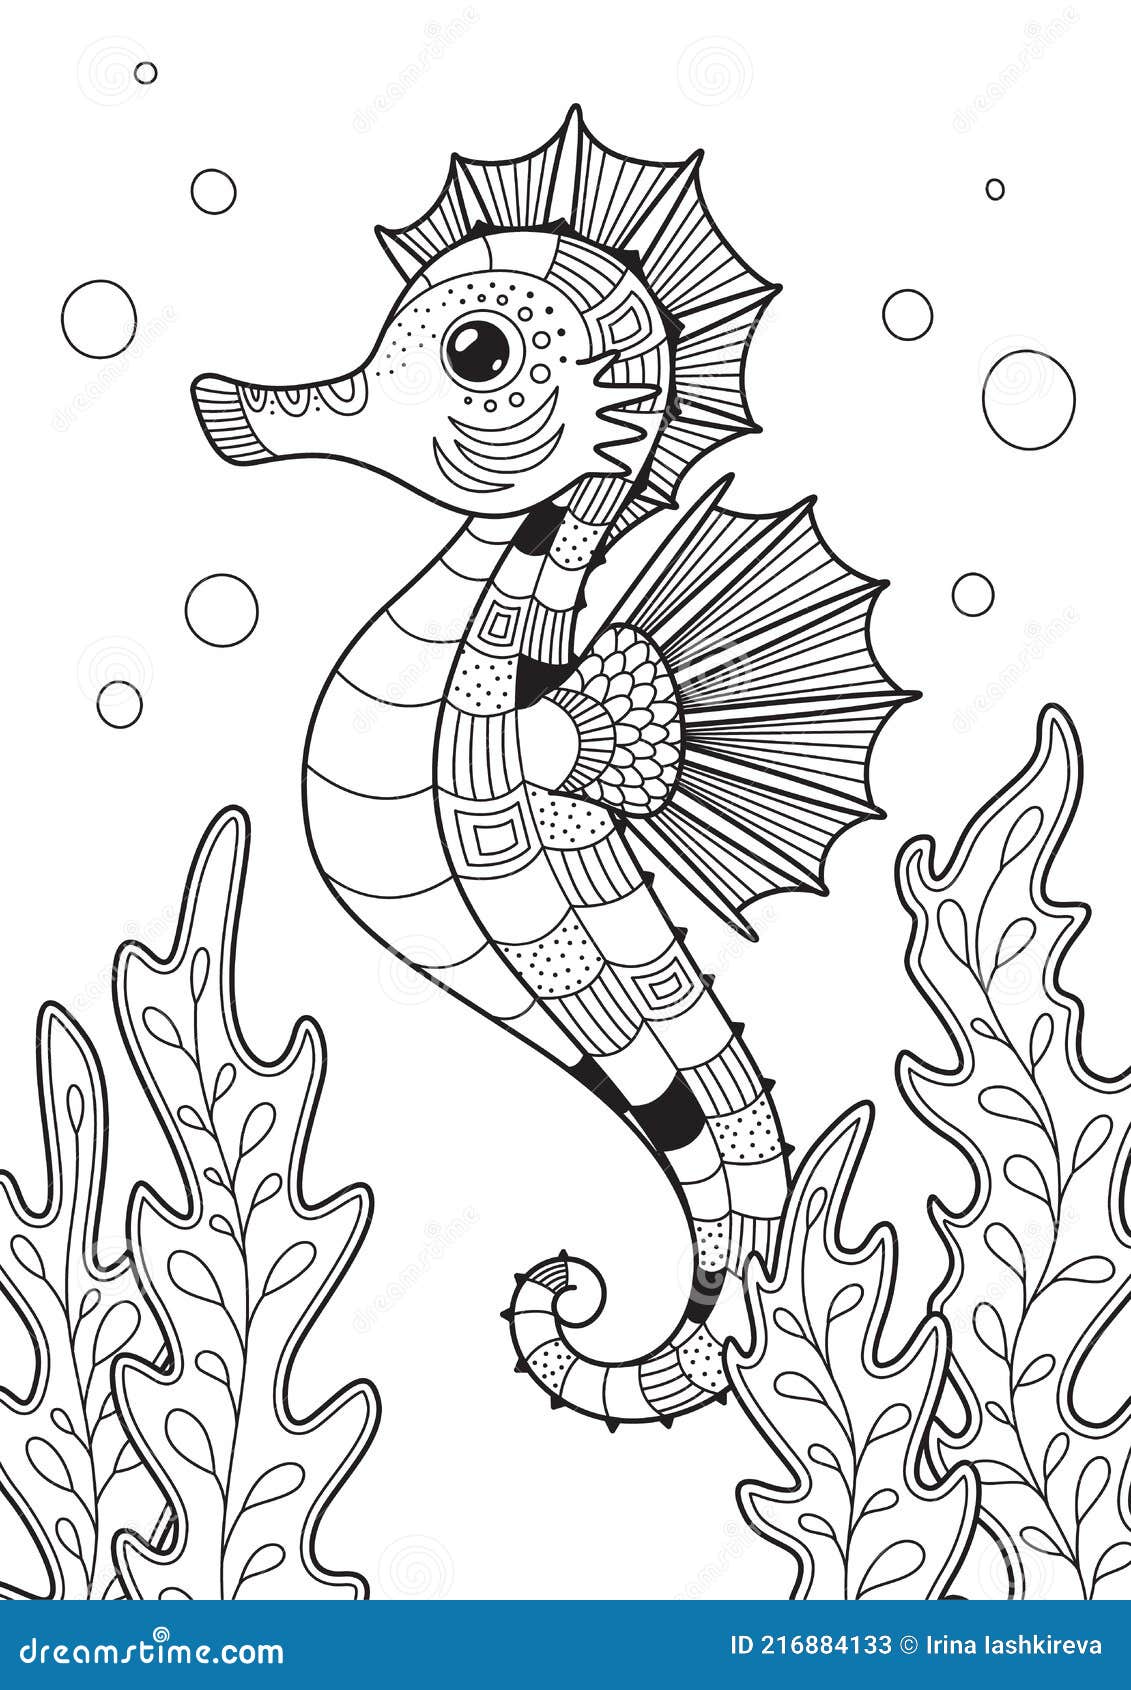 Sea horse doodle coloring book page antistress for adults zentangle style for print tattoo coloring book page black and white stock vector